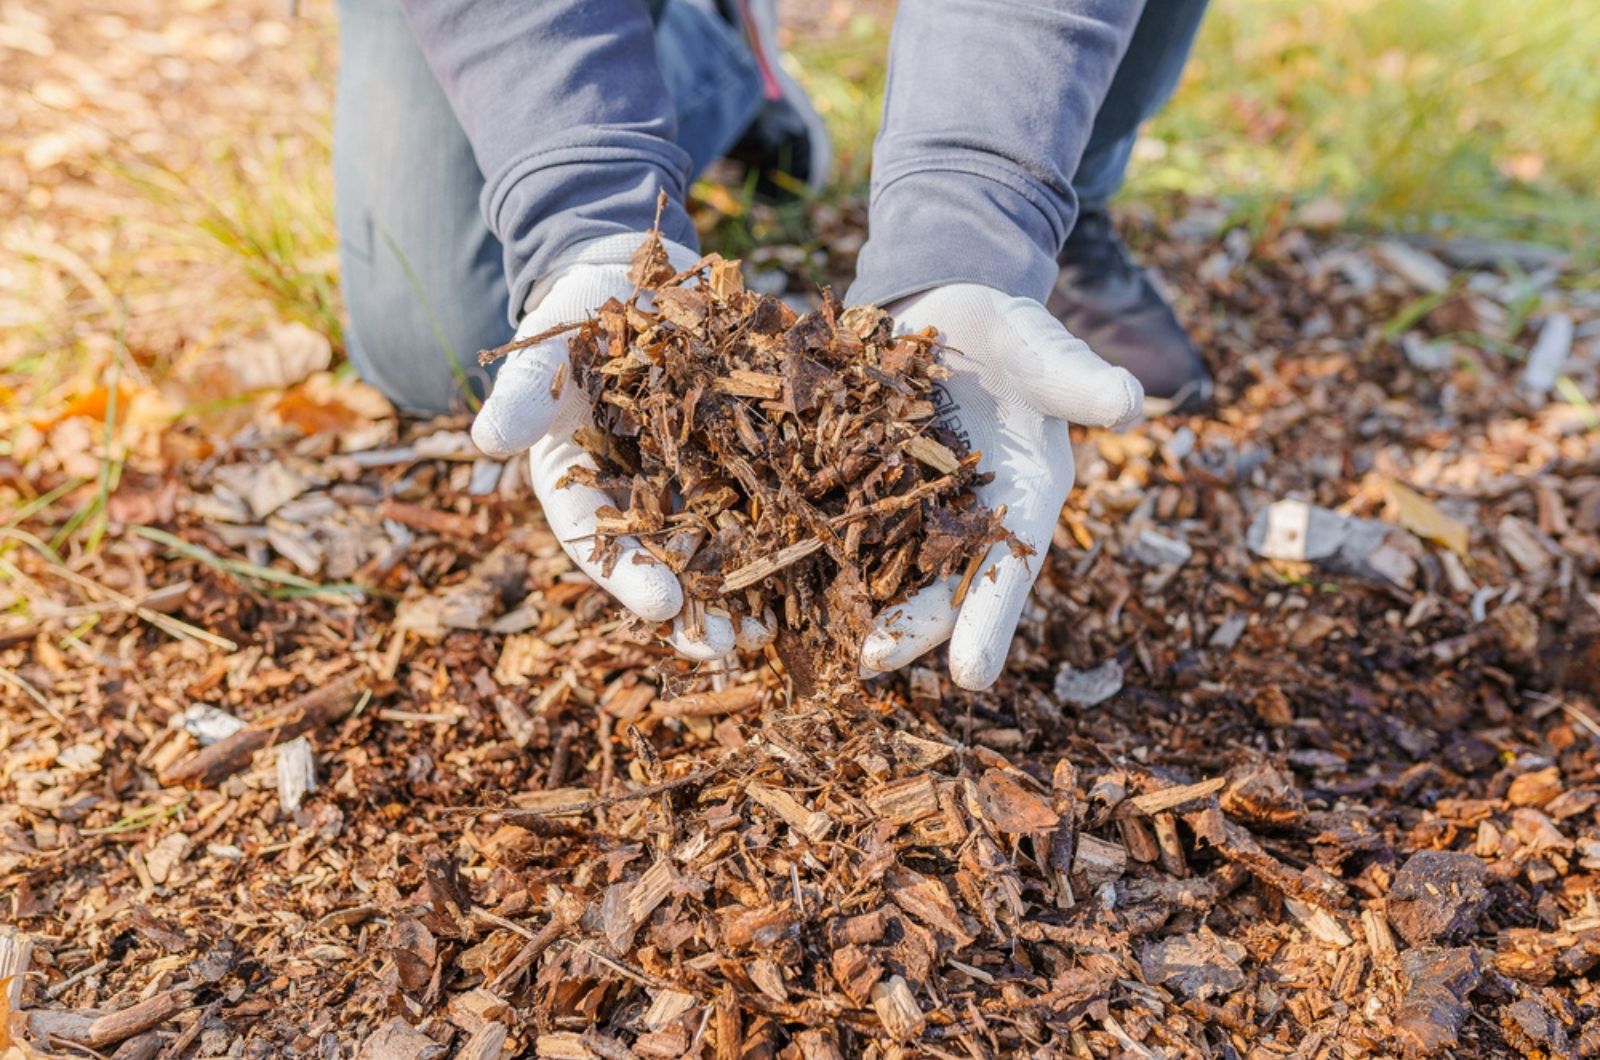 Hands in gardening gloves of person hold ground wood chips